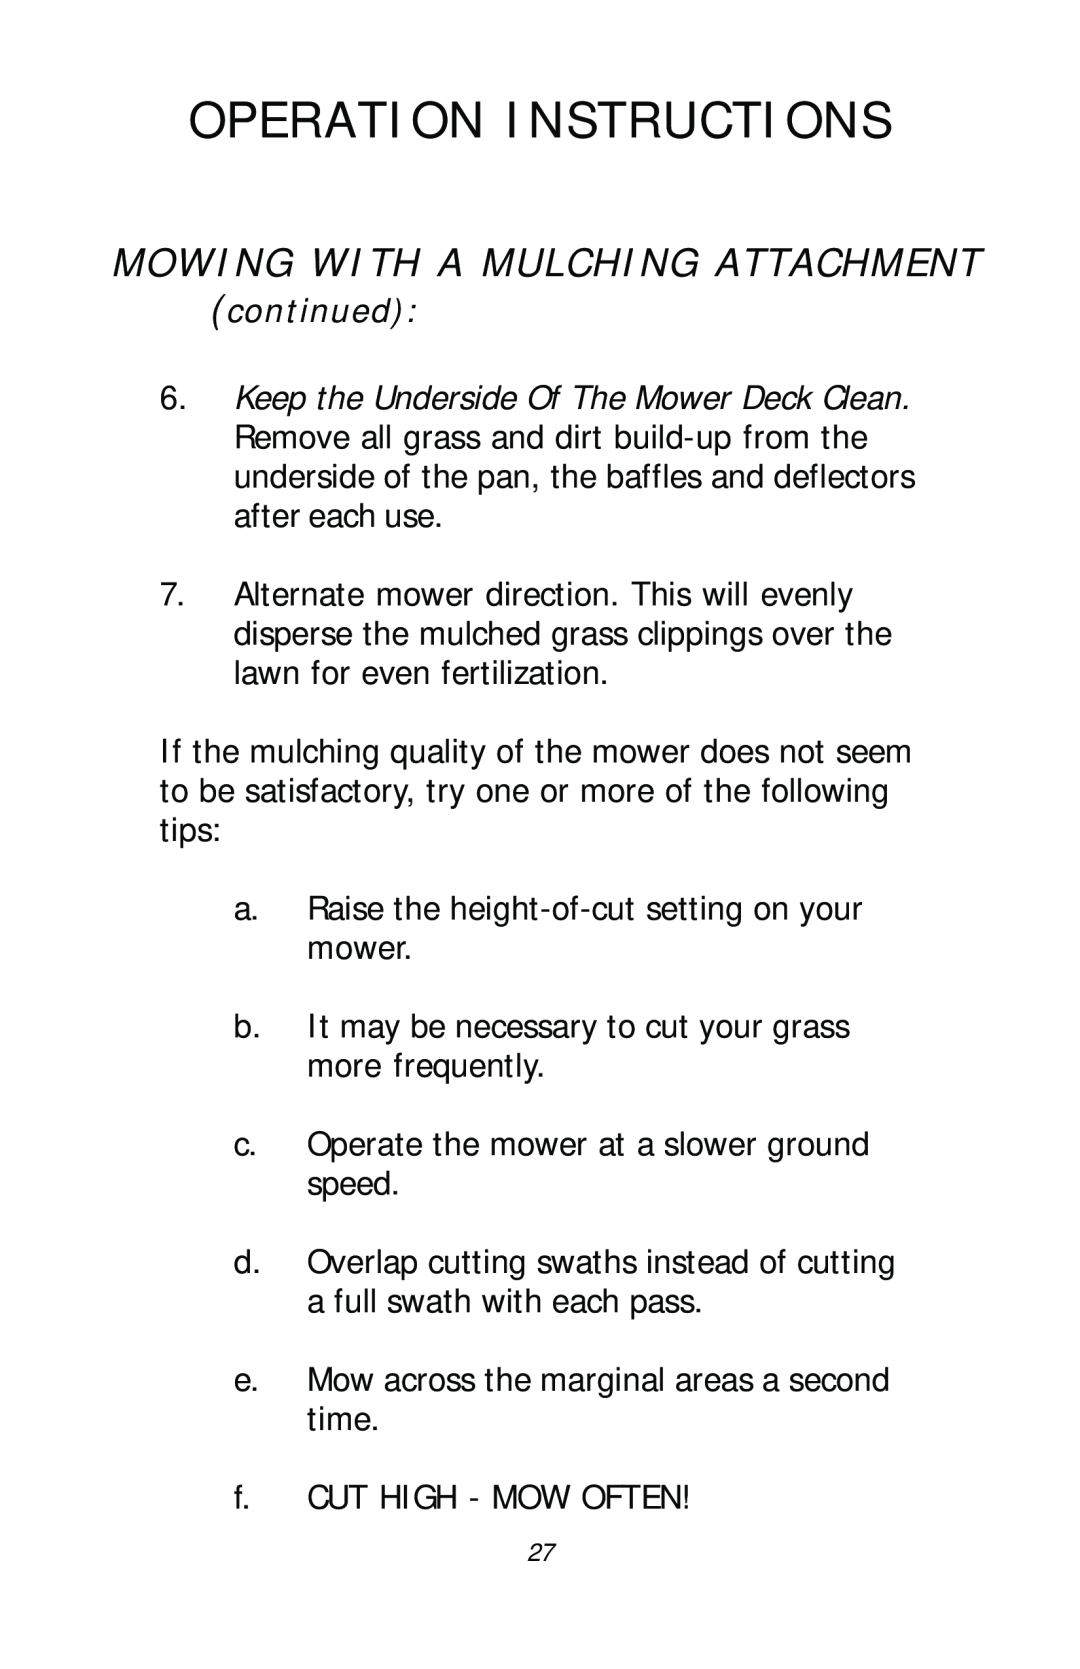 Dixon 13782-0503, ZTR 4516, ZTR 4515, ZTR 4518 manual MOWING WITH A MULCHING ATTACHMENT continued, Operation Instructions 